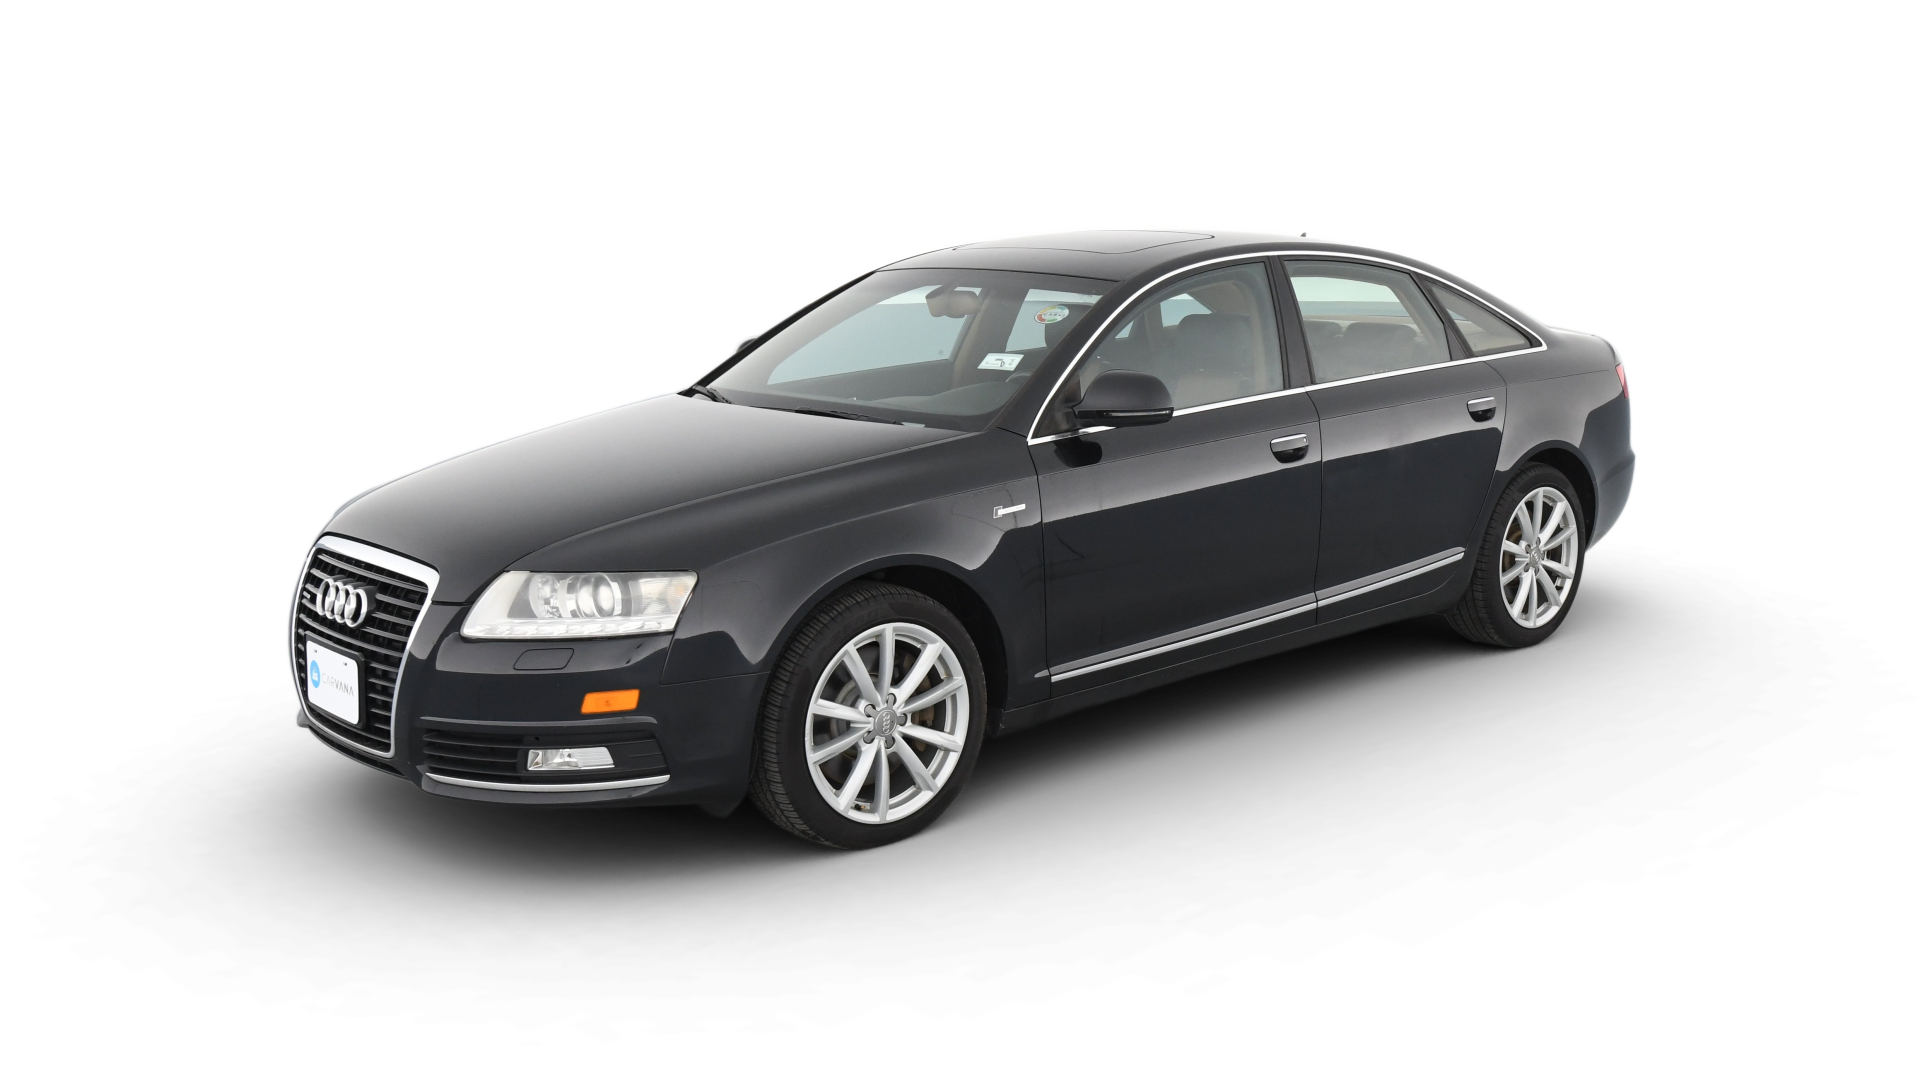 Used 2010 Audi A6 For Sale Online | Carvana